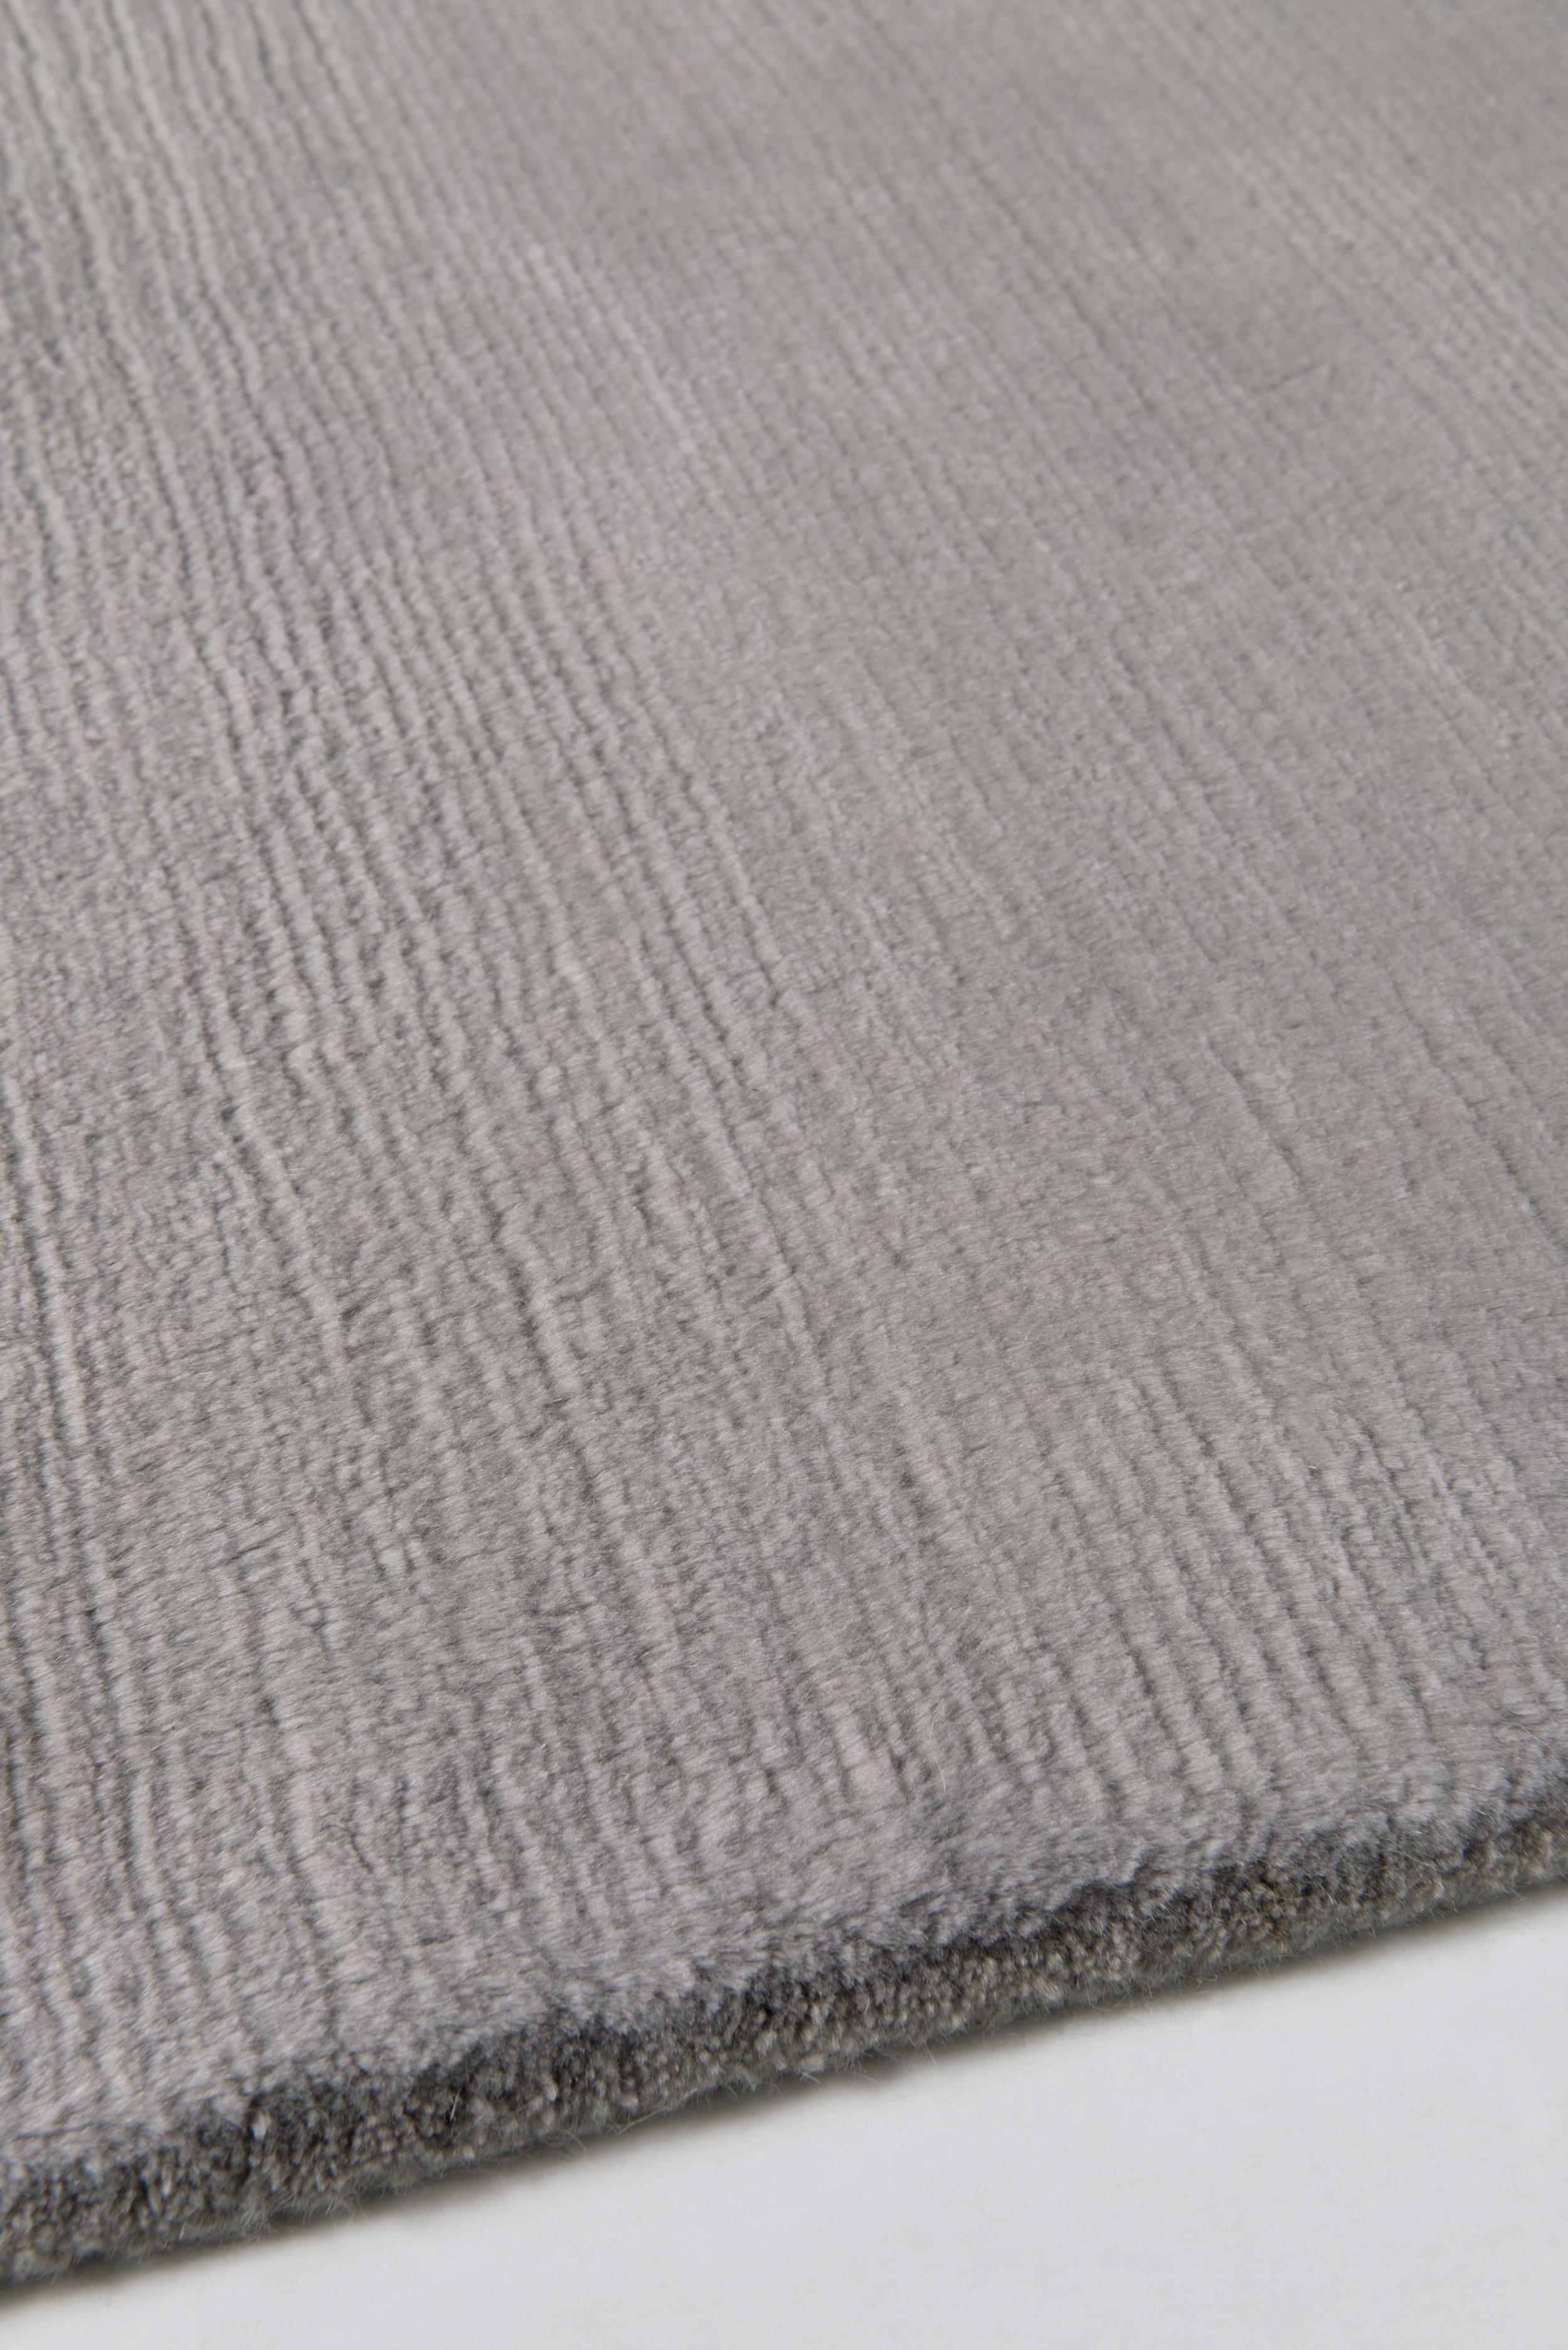 Crafted from soft mohair wool, this simple, modern rug is hand-knotted into a plain, textural finish with a luxurious sheen. Mohair Dove is an elegant addition to your home and is available in any size and color, and a deep or short